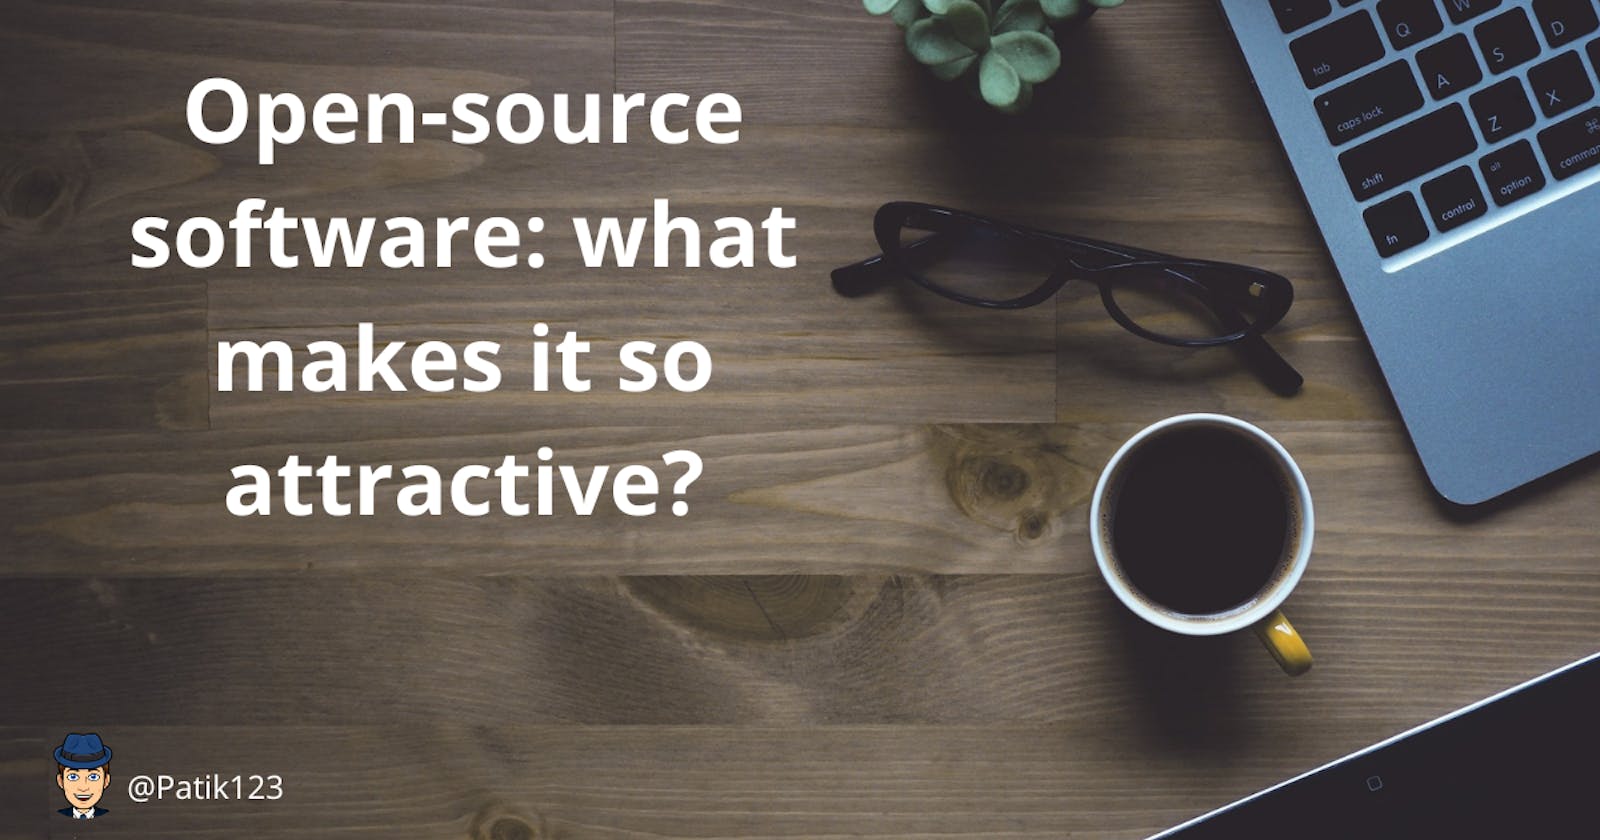 Open-source software: what makes it so attractive?